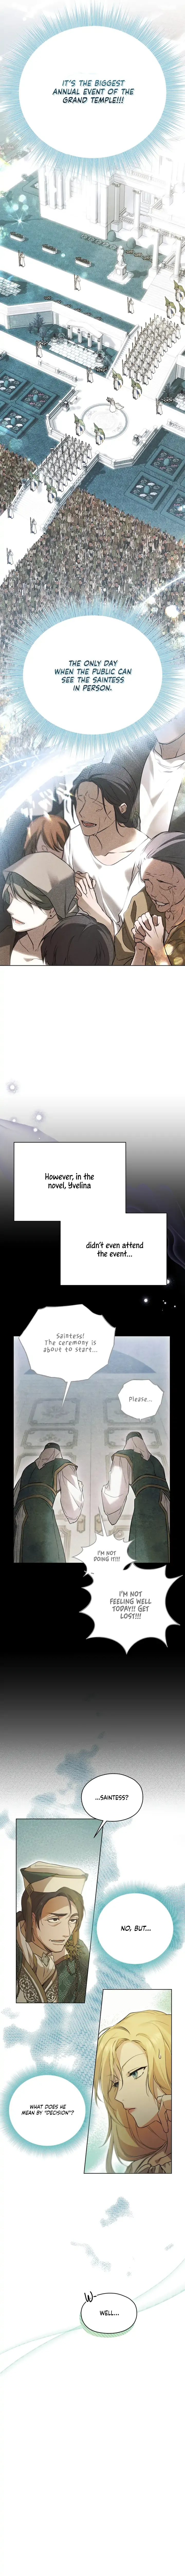 The Fake Saintess Awaits Her Exit chapter 4 - Page 4